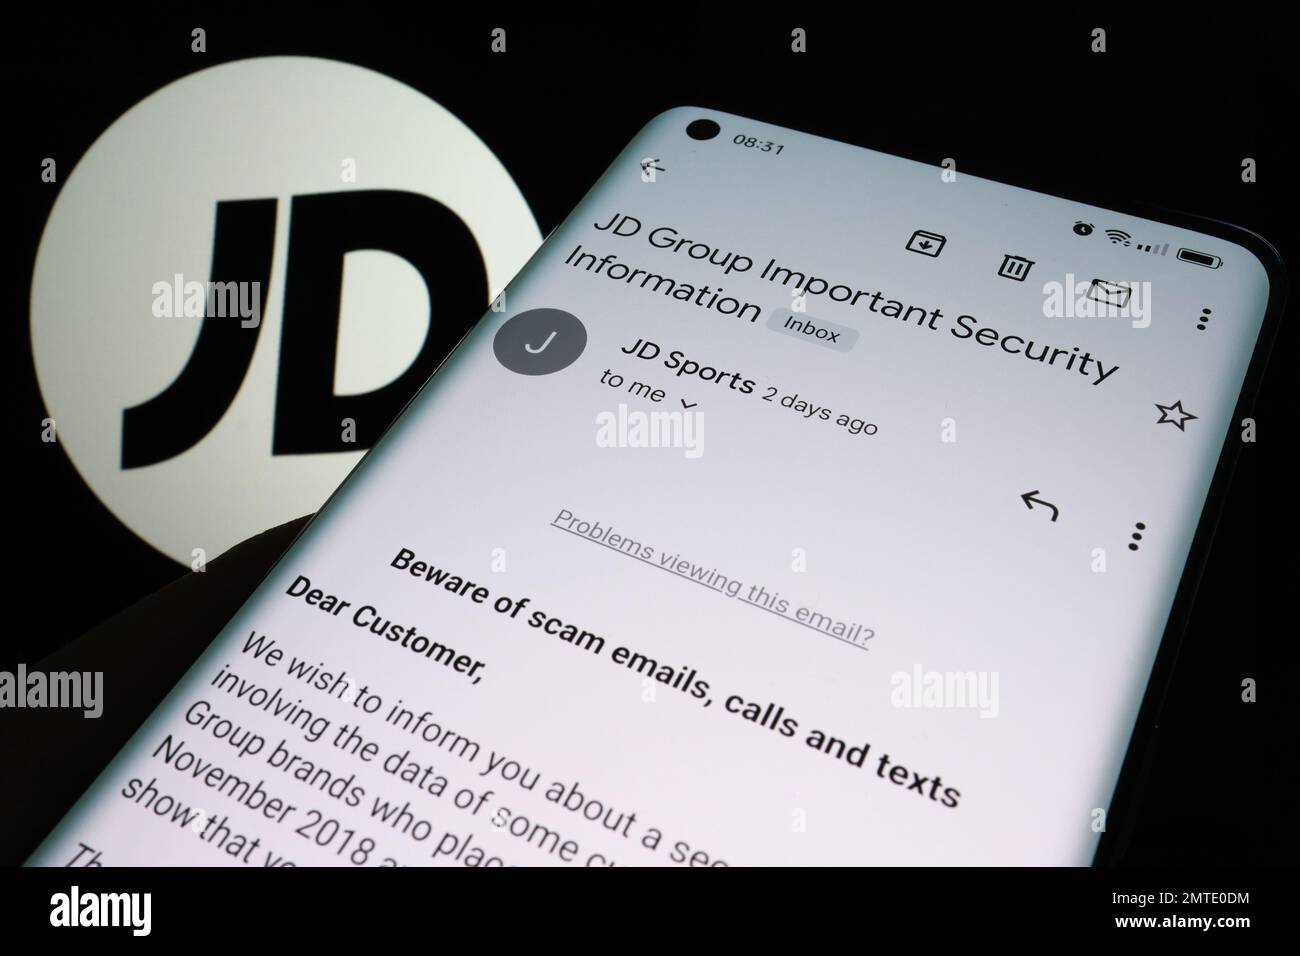 JD Sports email to the customer warning about company's data leak and cyber security issue. Authentic email. Stock Photo